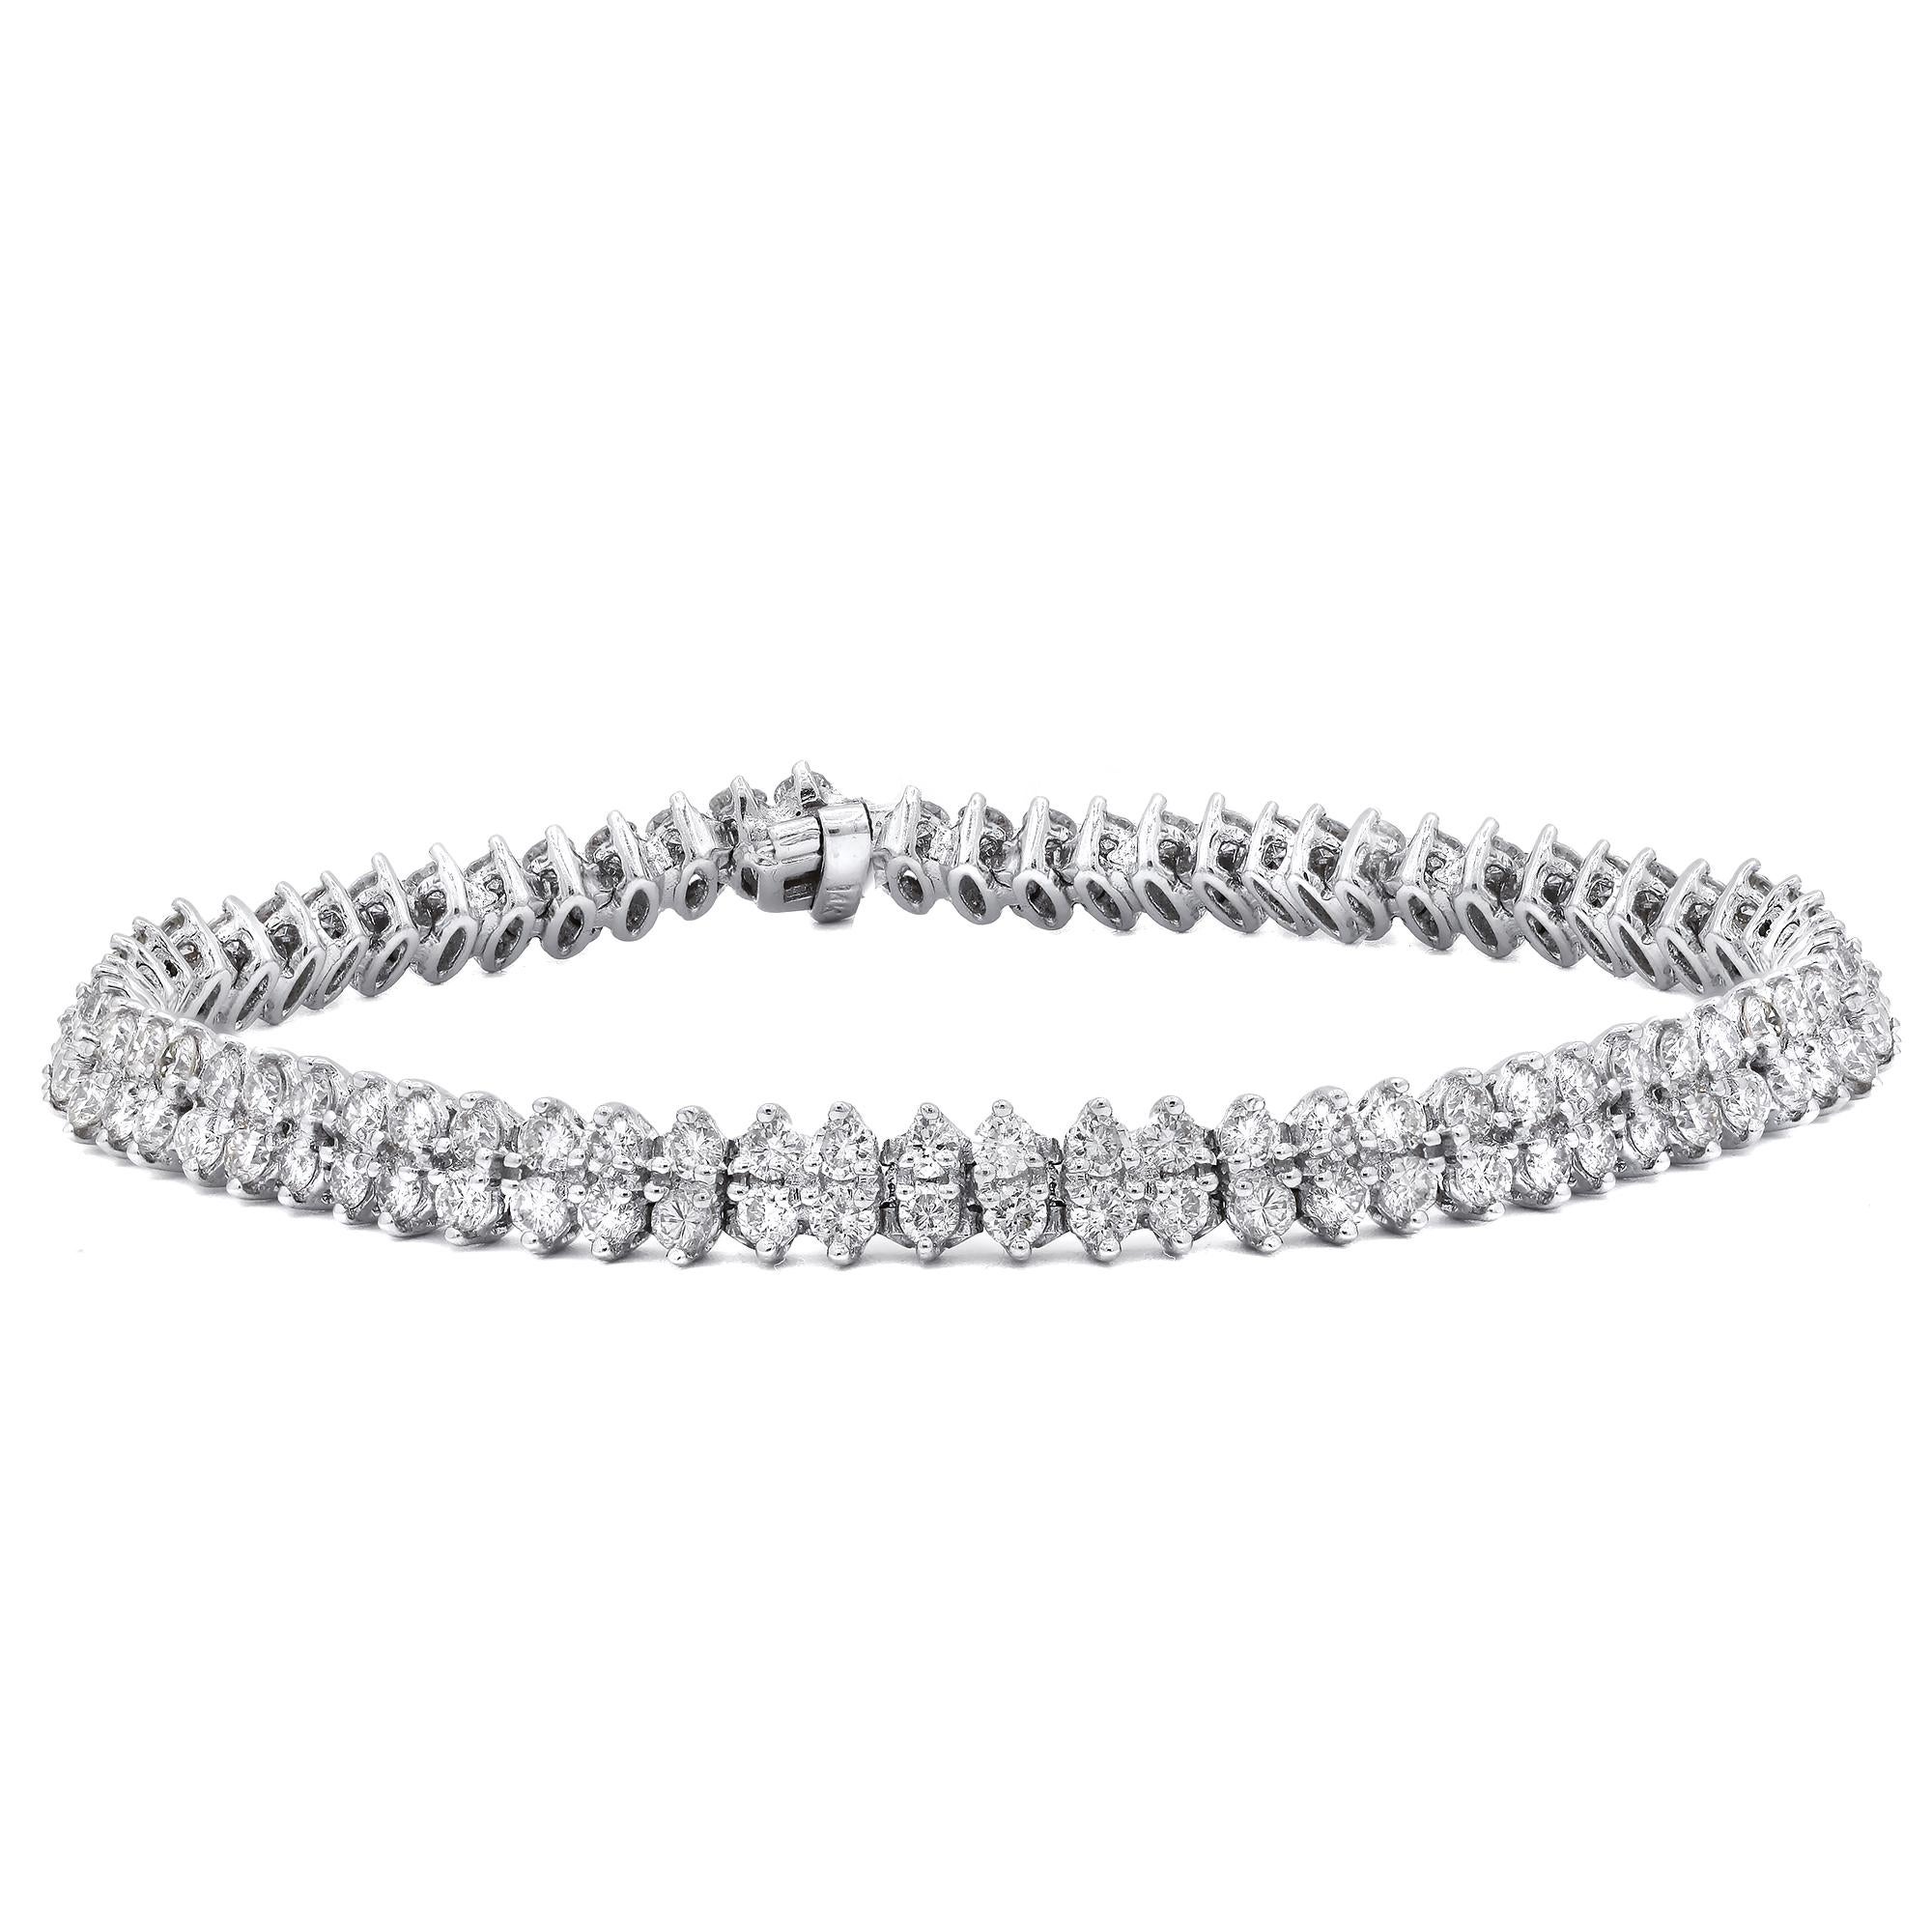 14kt white gold tennis bracelet featuring 5.00 cts tw of round diamonds GH VS SI
Diana M. is a leading supplier of top-quality fine jewelry for over 35 years.
Diana M is one-stop shop for all your jewelry shopping, carrying line of diamond rings,